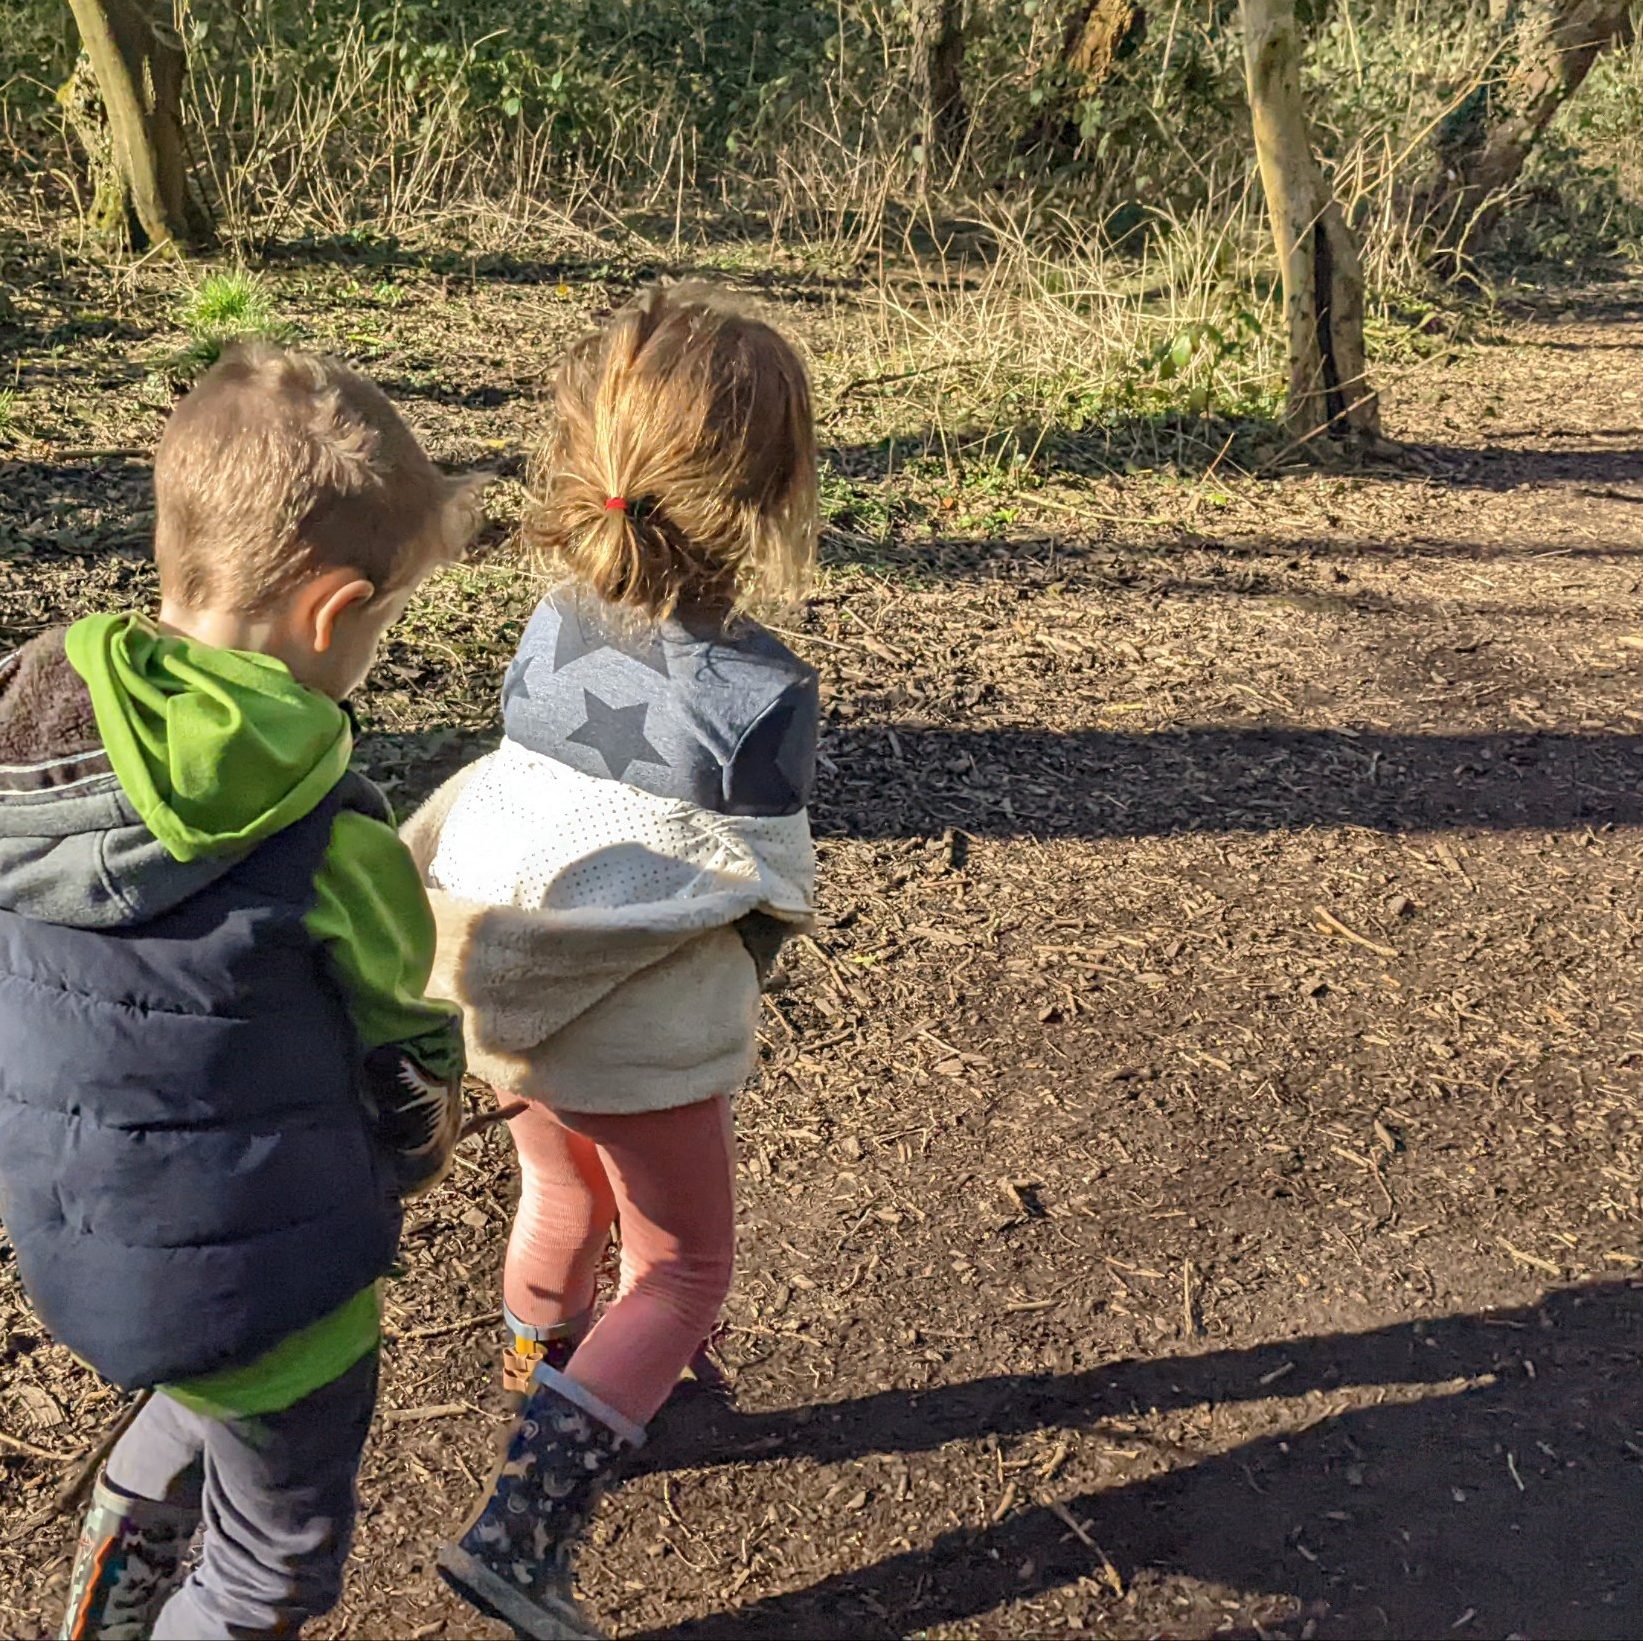 An Outdoor Family Walk in nature. Two children waling through a woodland. 